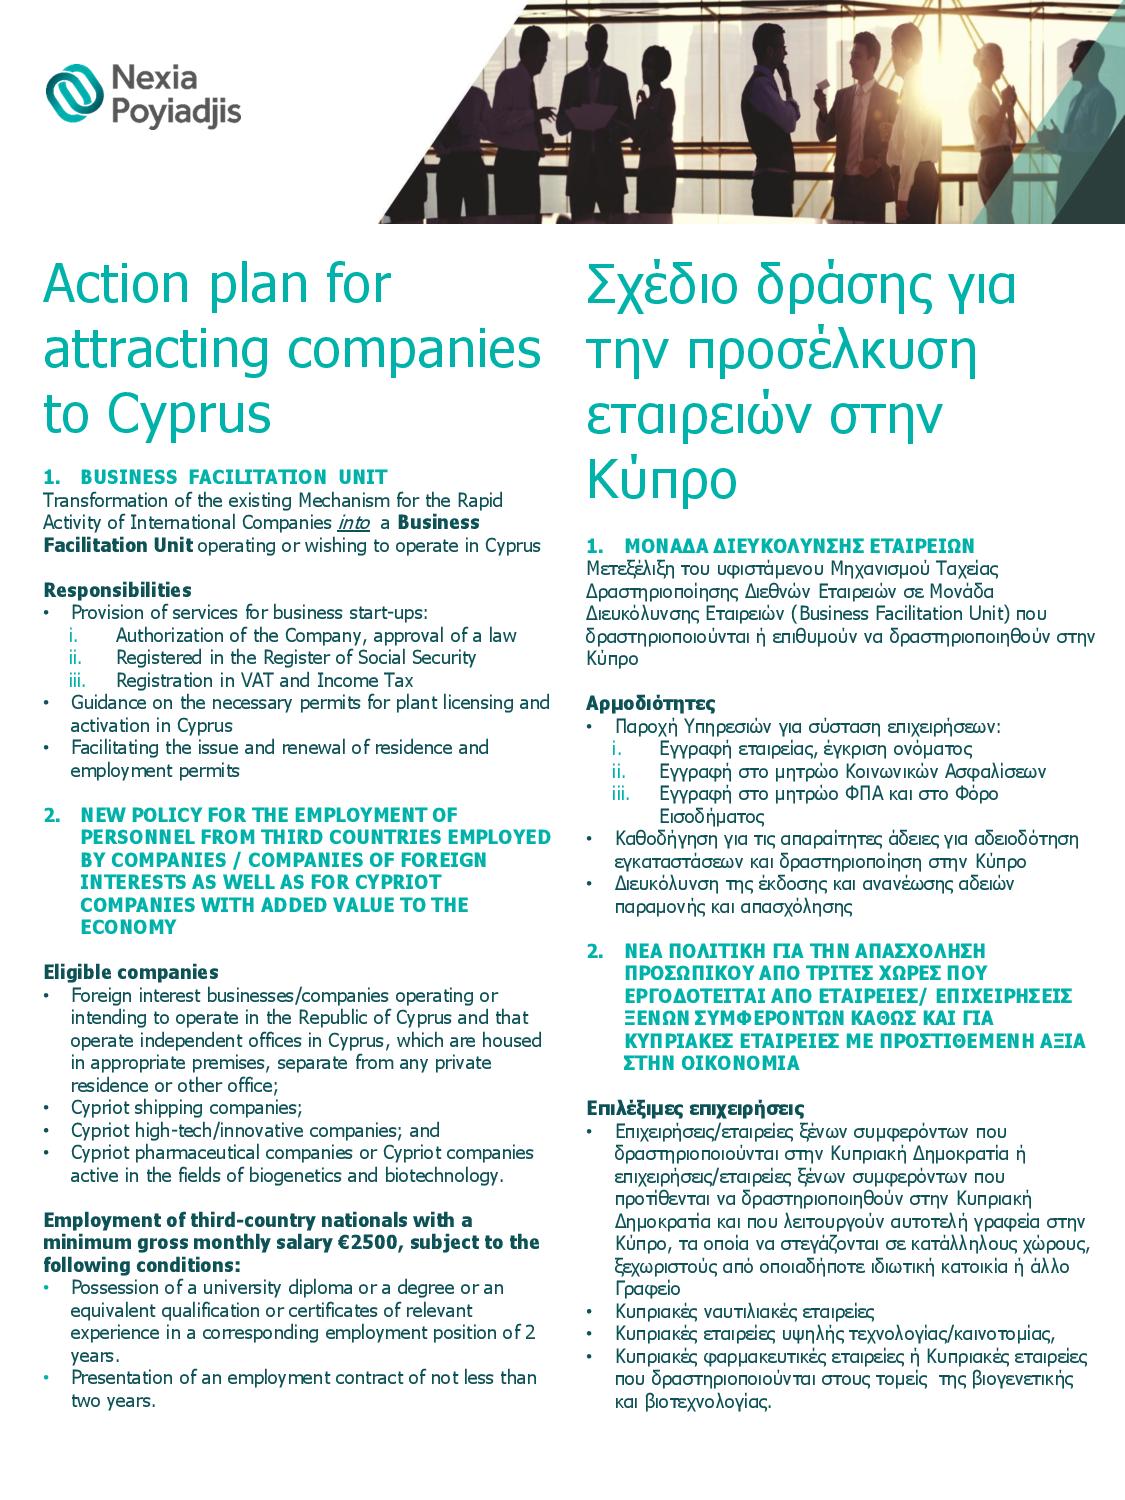 Nexia Newsletter October 2021: Action plan for attracting companies to Cyprus